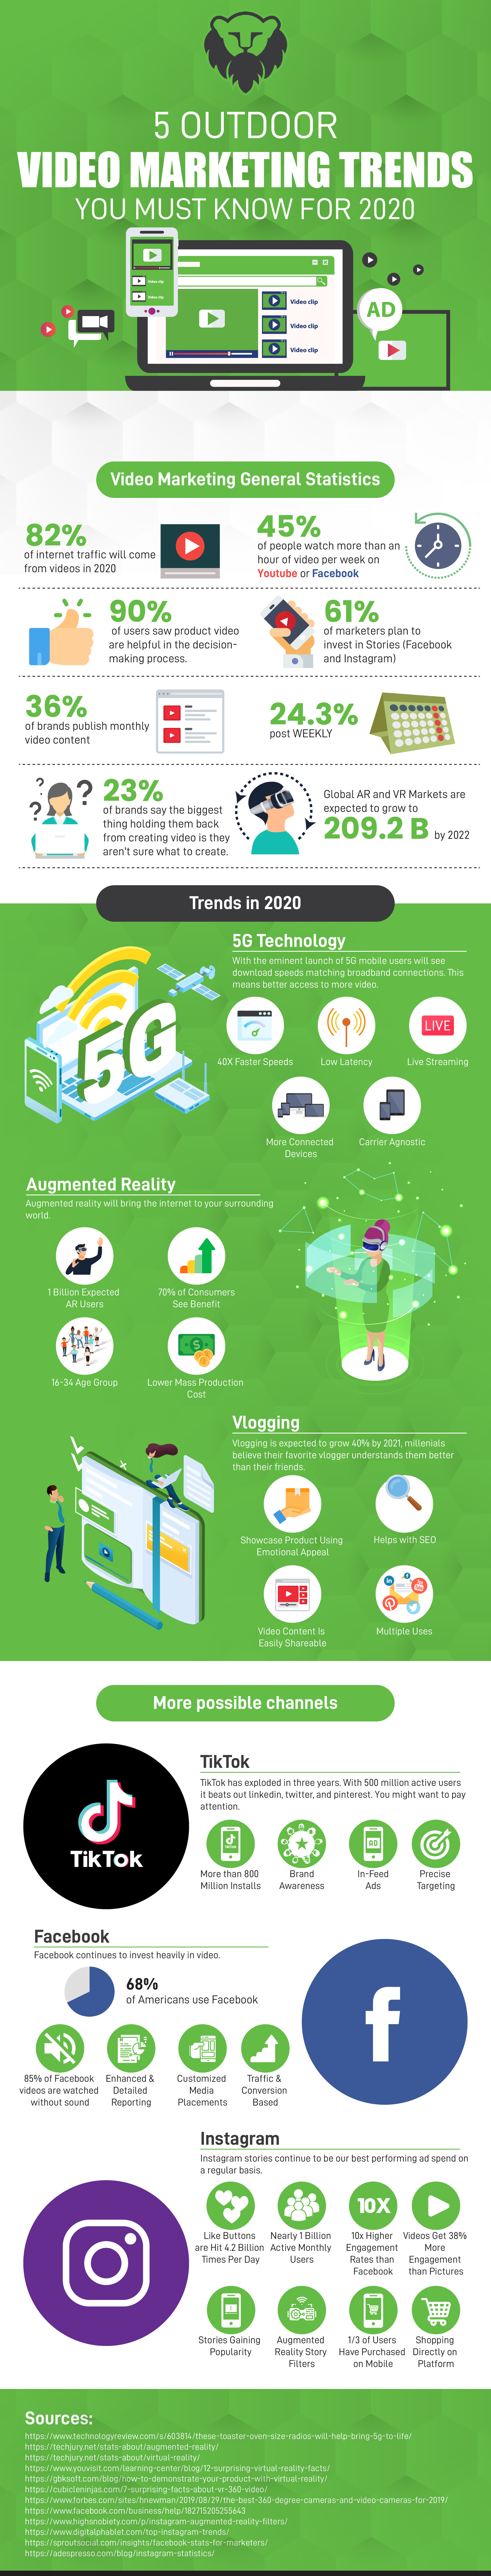 Outdoor Video Marketing Trends For 2020 Infographic